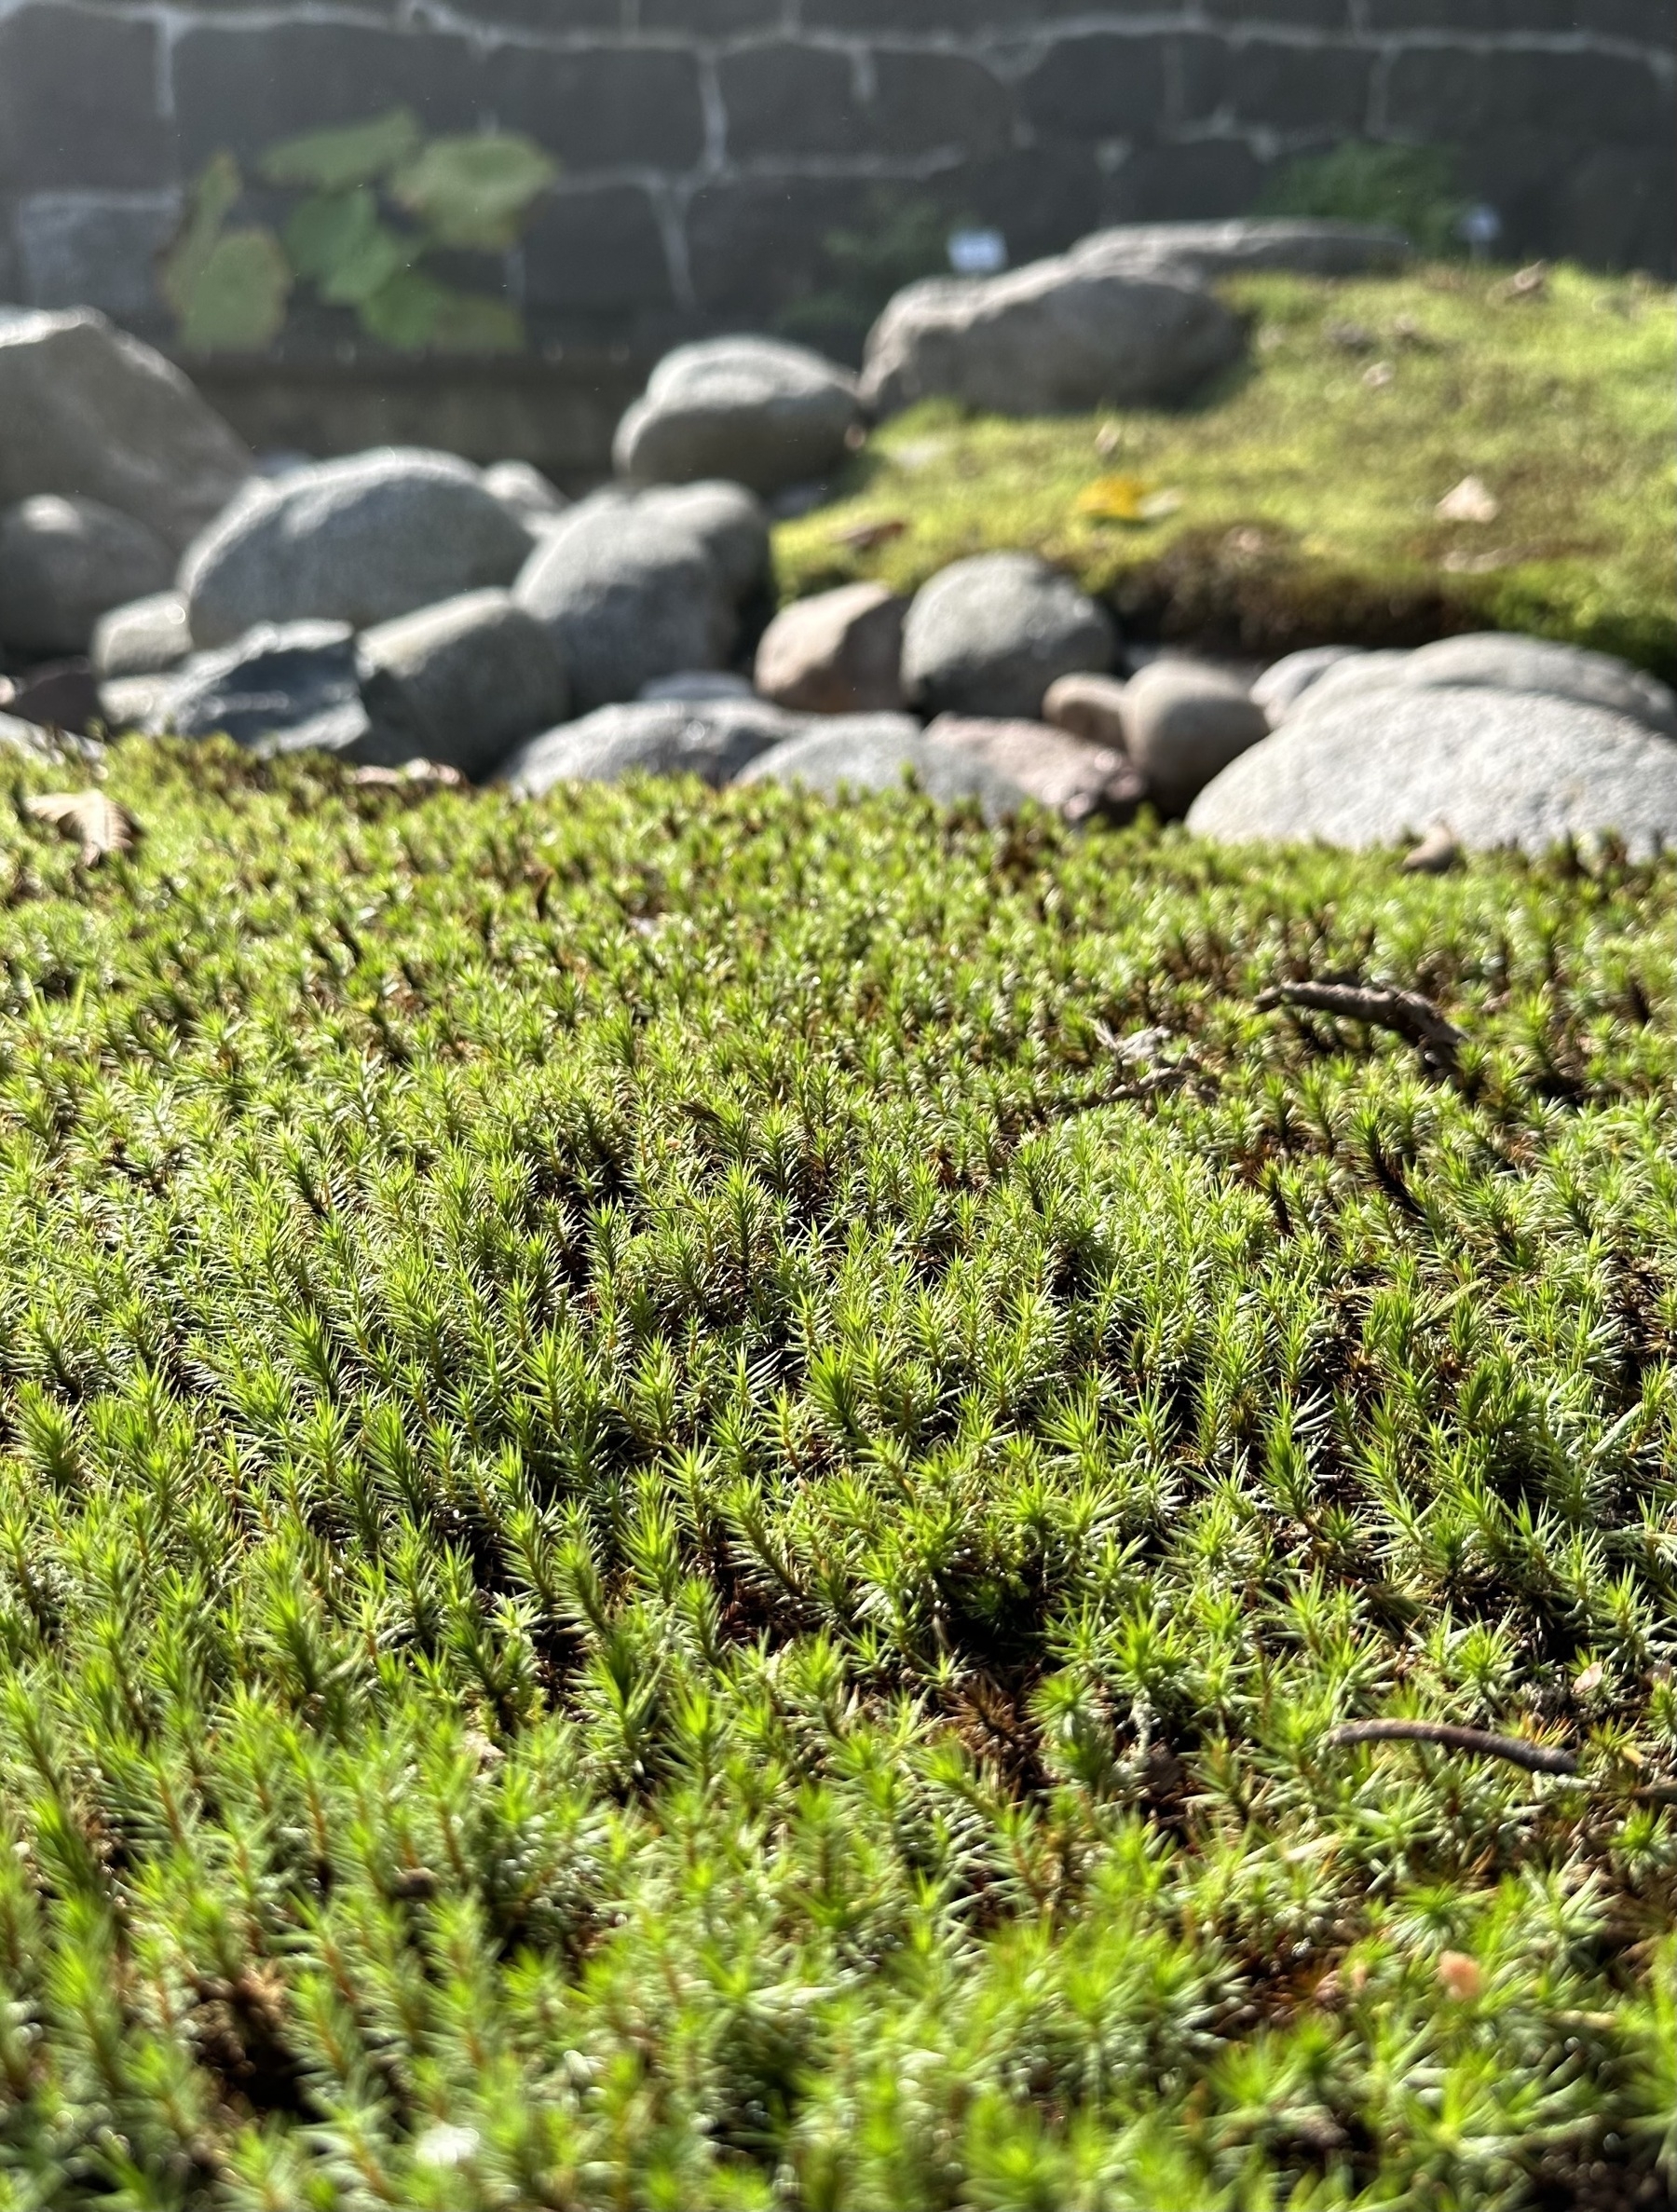 Haircap moss in the foreground, with some stones in the background.